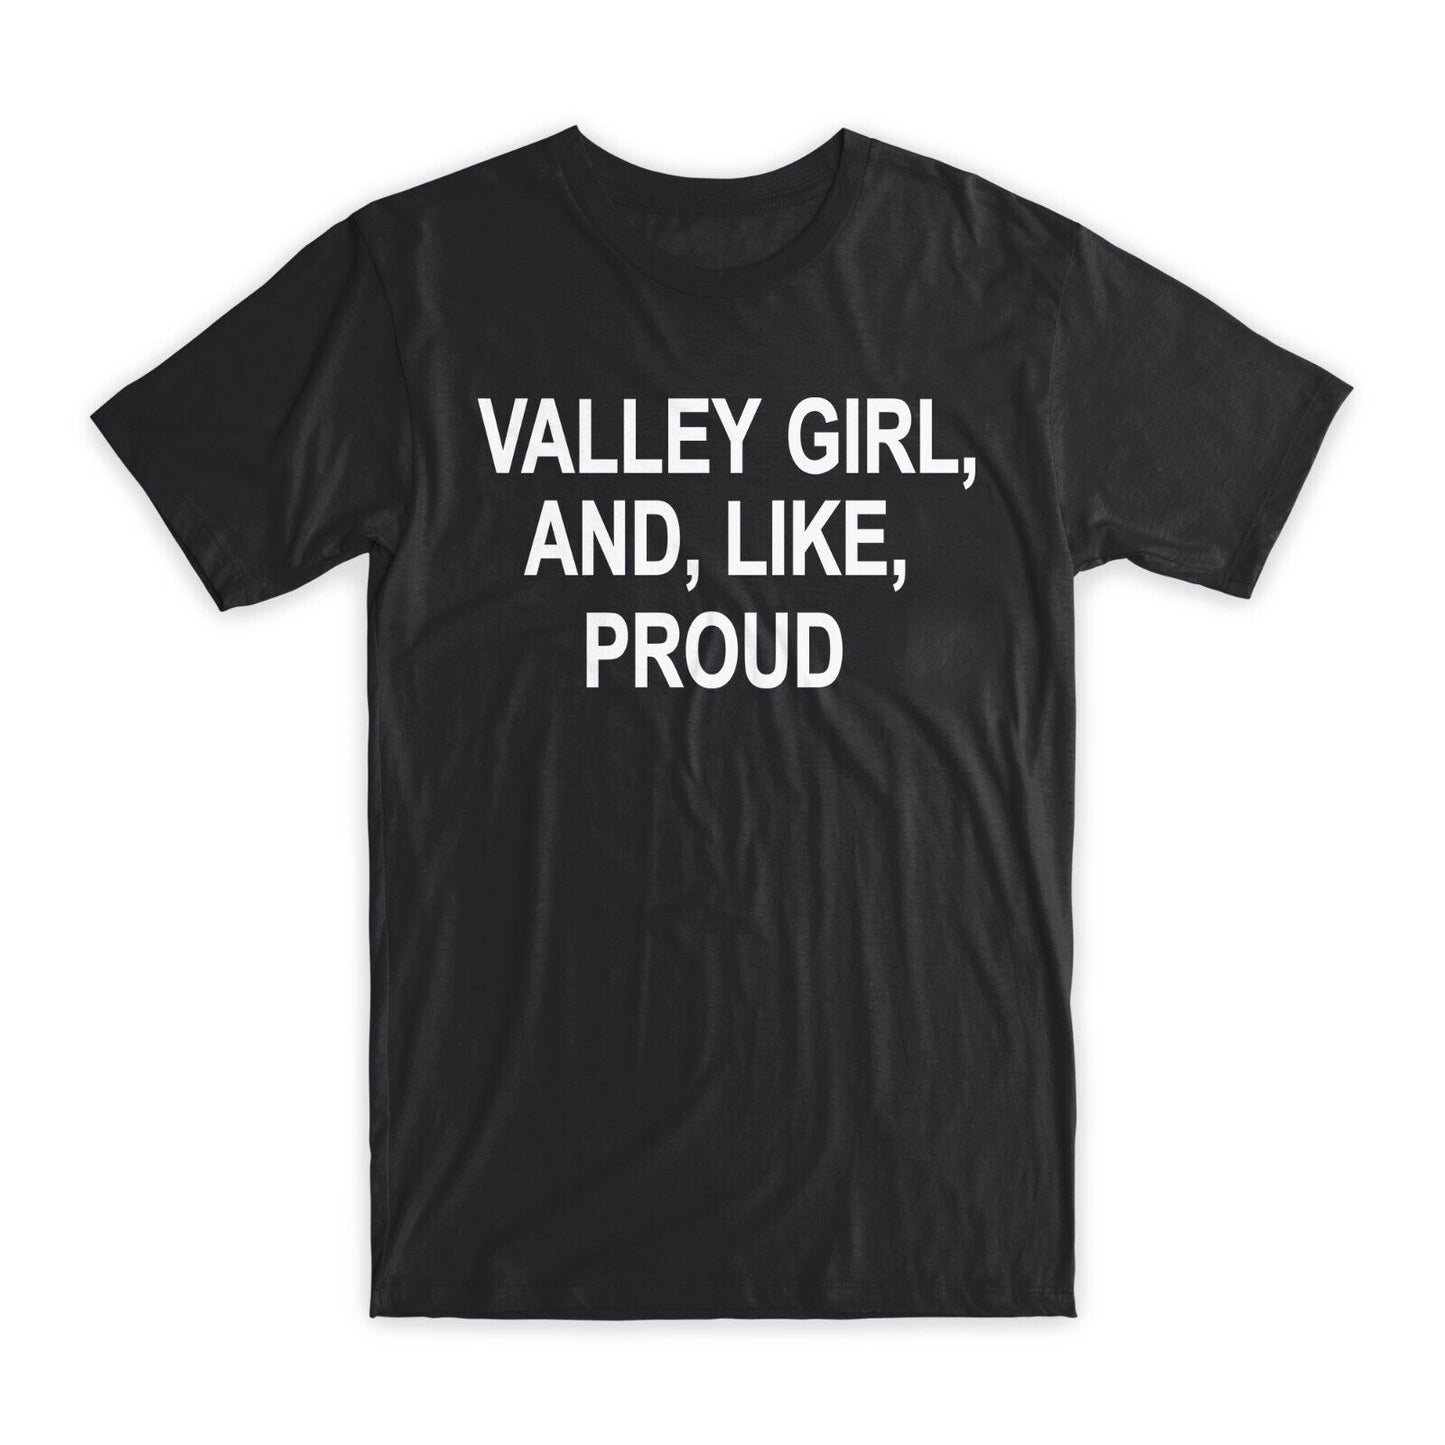 Valley Girl and Like Proud T-Shirt Premium Cotton Crew Neck Funny Tees Gifts NEW